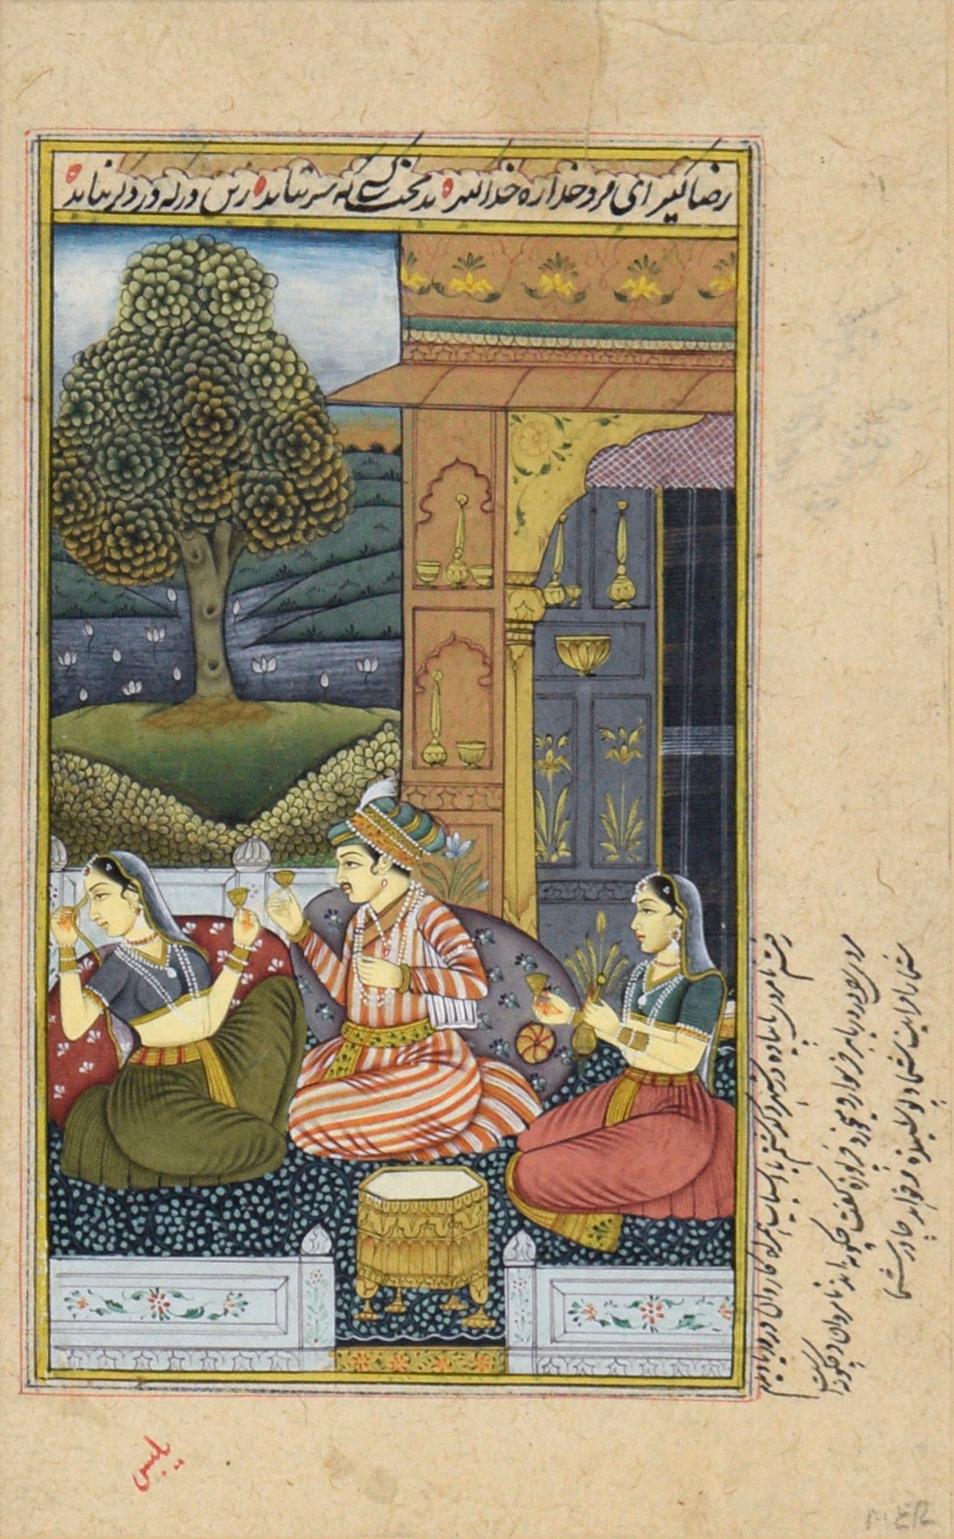 Highly detailed Persian or Mughal era miniature painting from the book 